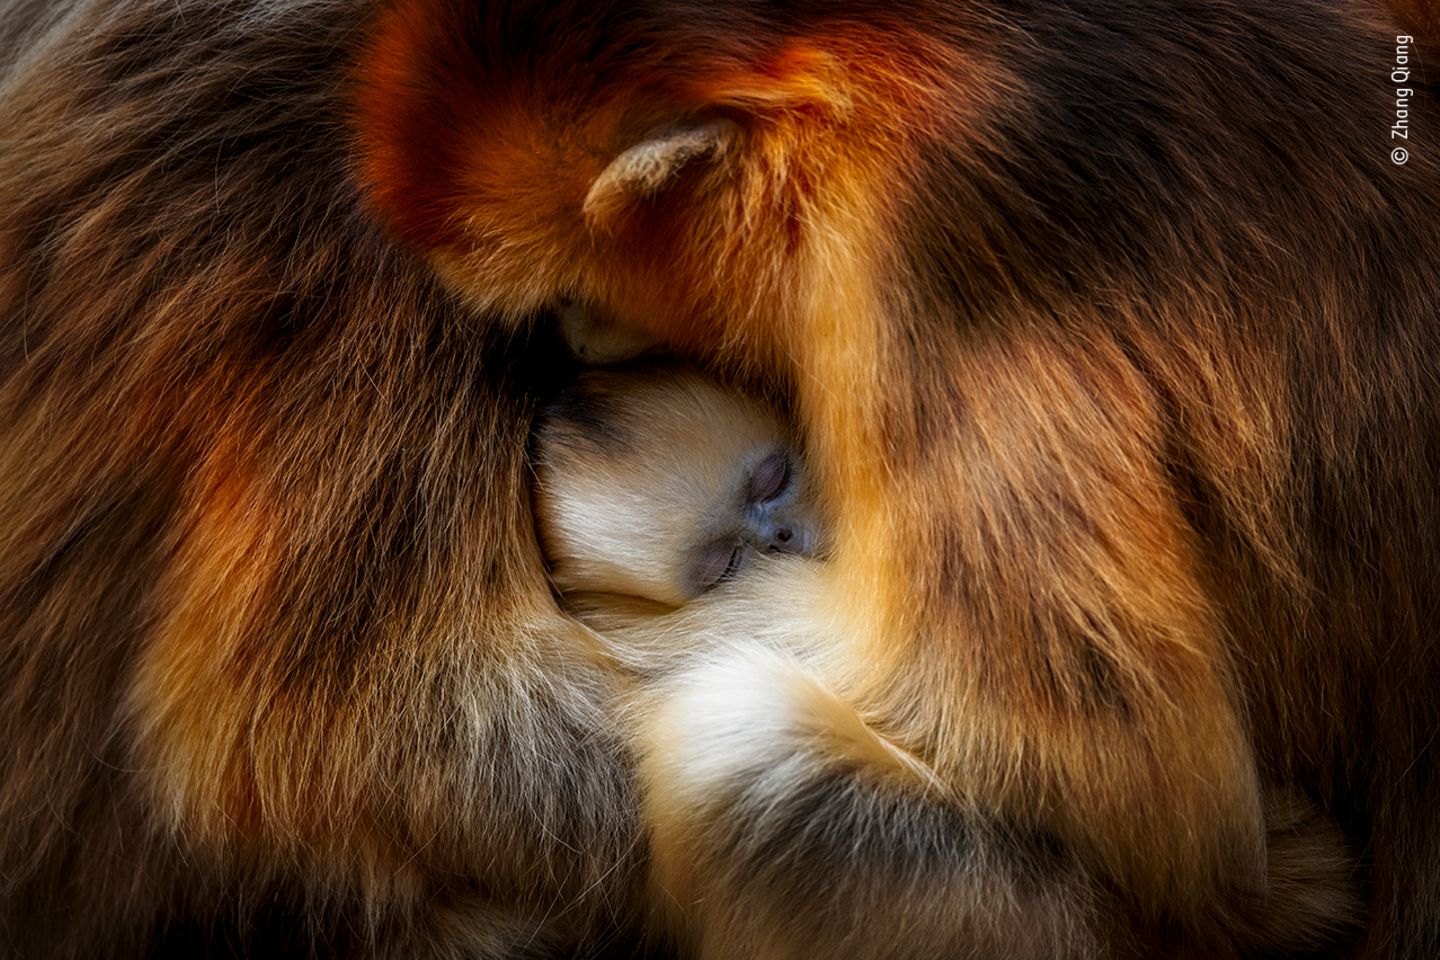 Monkey cuddle by Zhang Qiang, China  Zhang was visiting China’s Qinling Mountains to observe the behaviour of the Sichuan snub-nosed monkey. The mountains' temperate forests are the endangered monkeys’ only habitat, which in itself is under threat from forest disturbance. Zhang loves to watch the dynamics of the family group – how close and friendly they are to each other. And when it is time to rest, the females and young huddle together for warmth and protection. This image perfectly captures that moment of intimacy. The young monkey’s unmistakable blue face nestled inbetween two females, their striking golden-orange fur dappled in light. Canon EOS 1D X Mark II + EF 800mm f5.6L IS USM lens; 1/400 sec at f6.3; ISO 800; AV model.